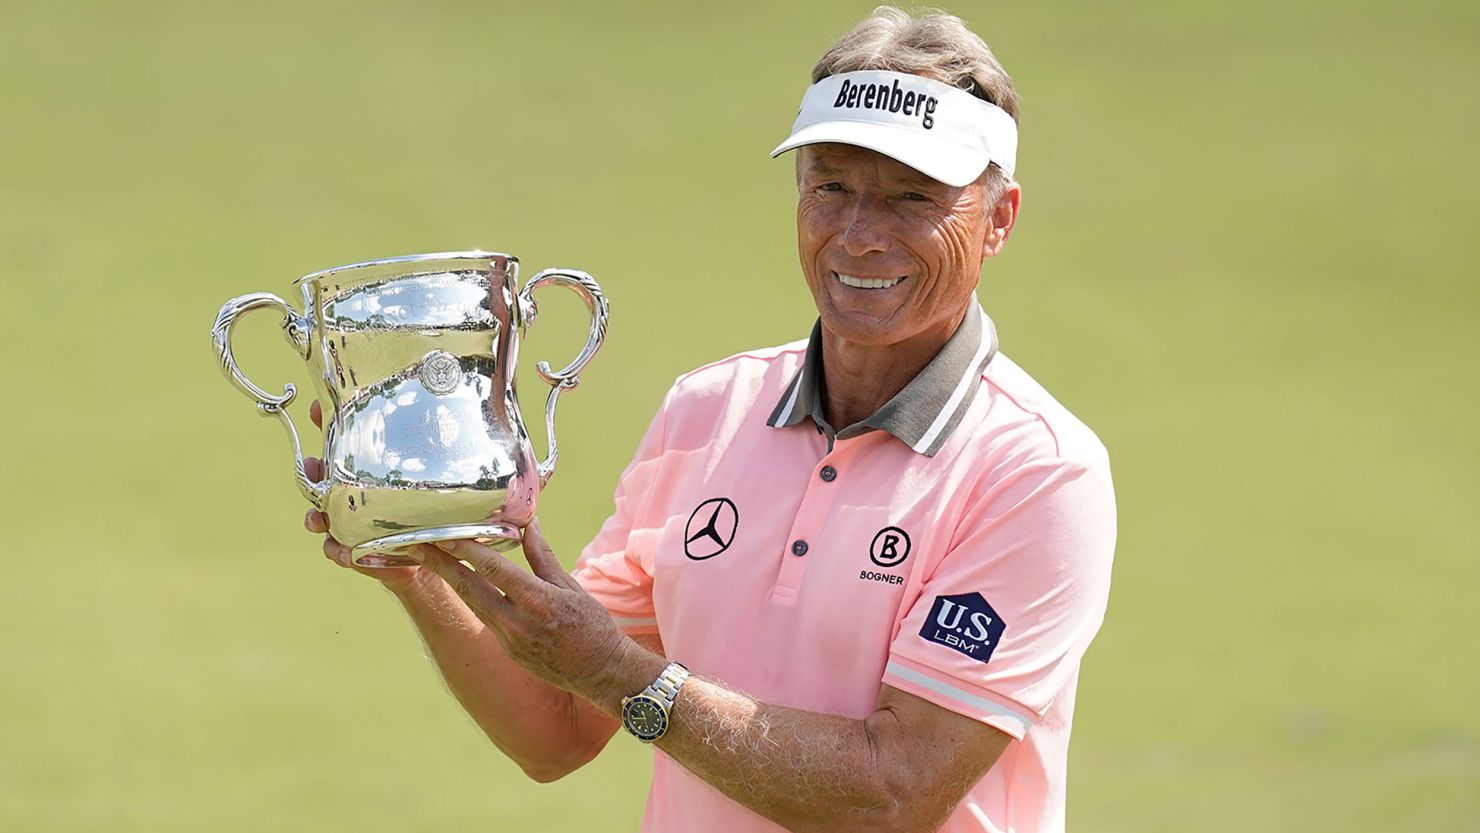 STEVENS POINT, WISCONSIN - JULY 02: Bernhard Langer of Germany poses with the Francis D. Ouimet Memorial Trophy after winning the U.S. Senior Open Championship at SentryWorld on July 02, 2023 in Stevens Point, Wisconsin.